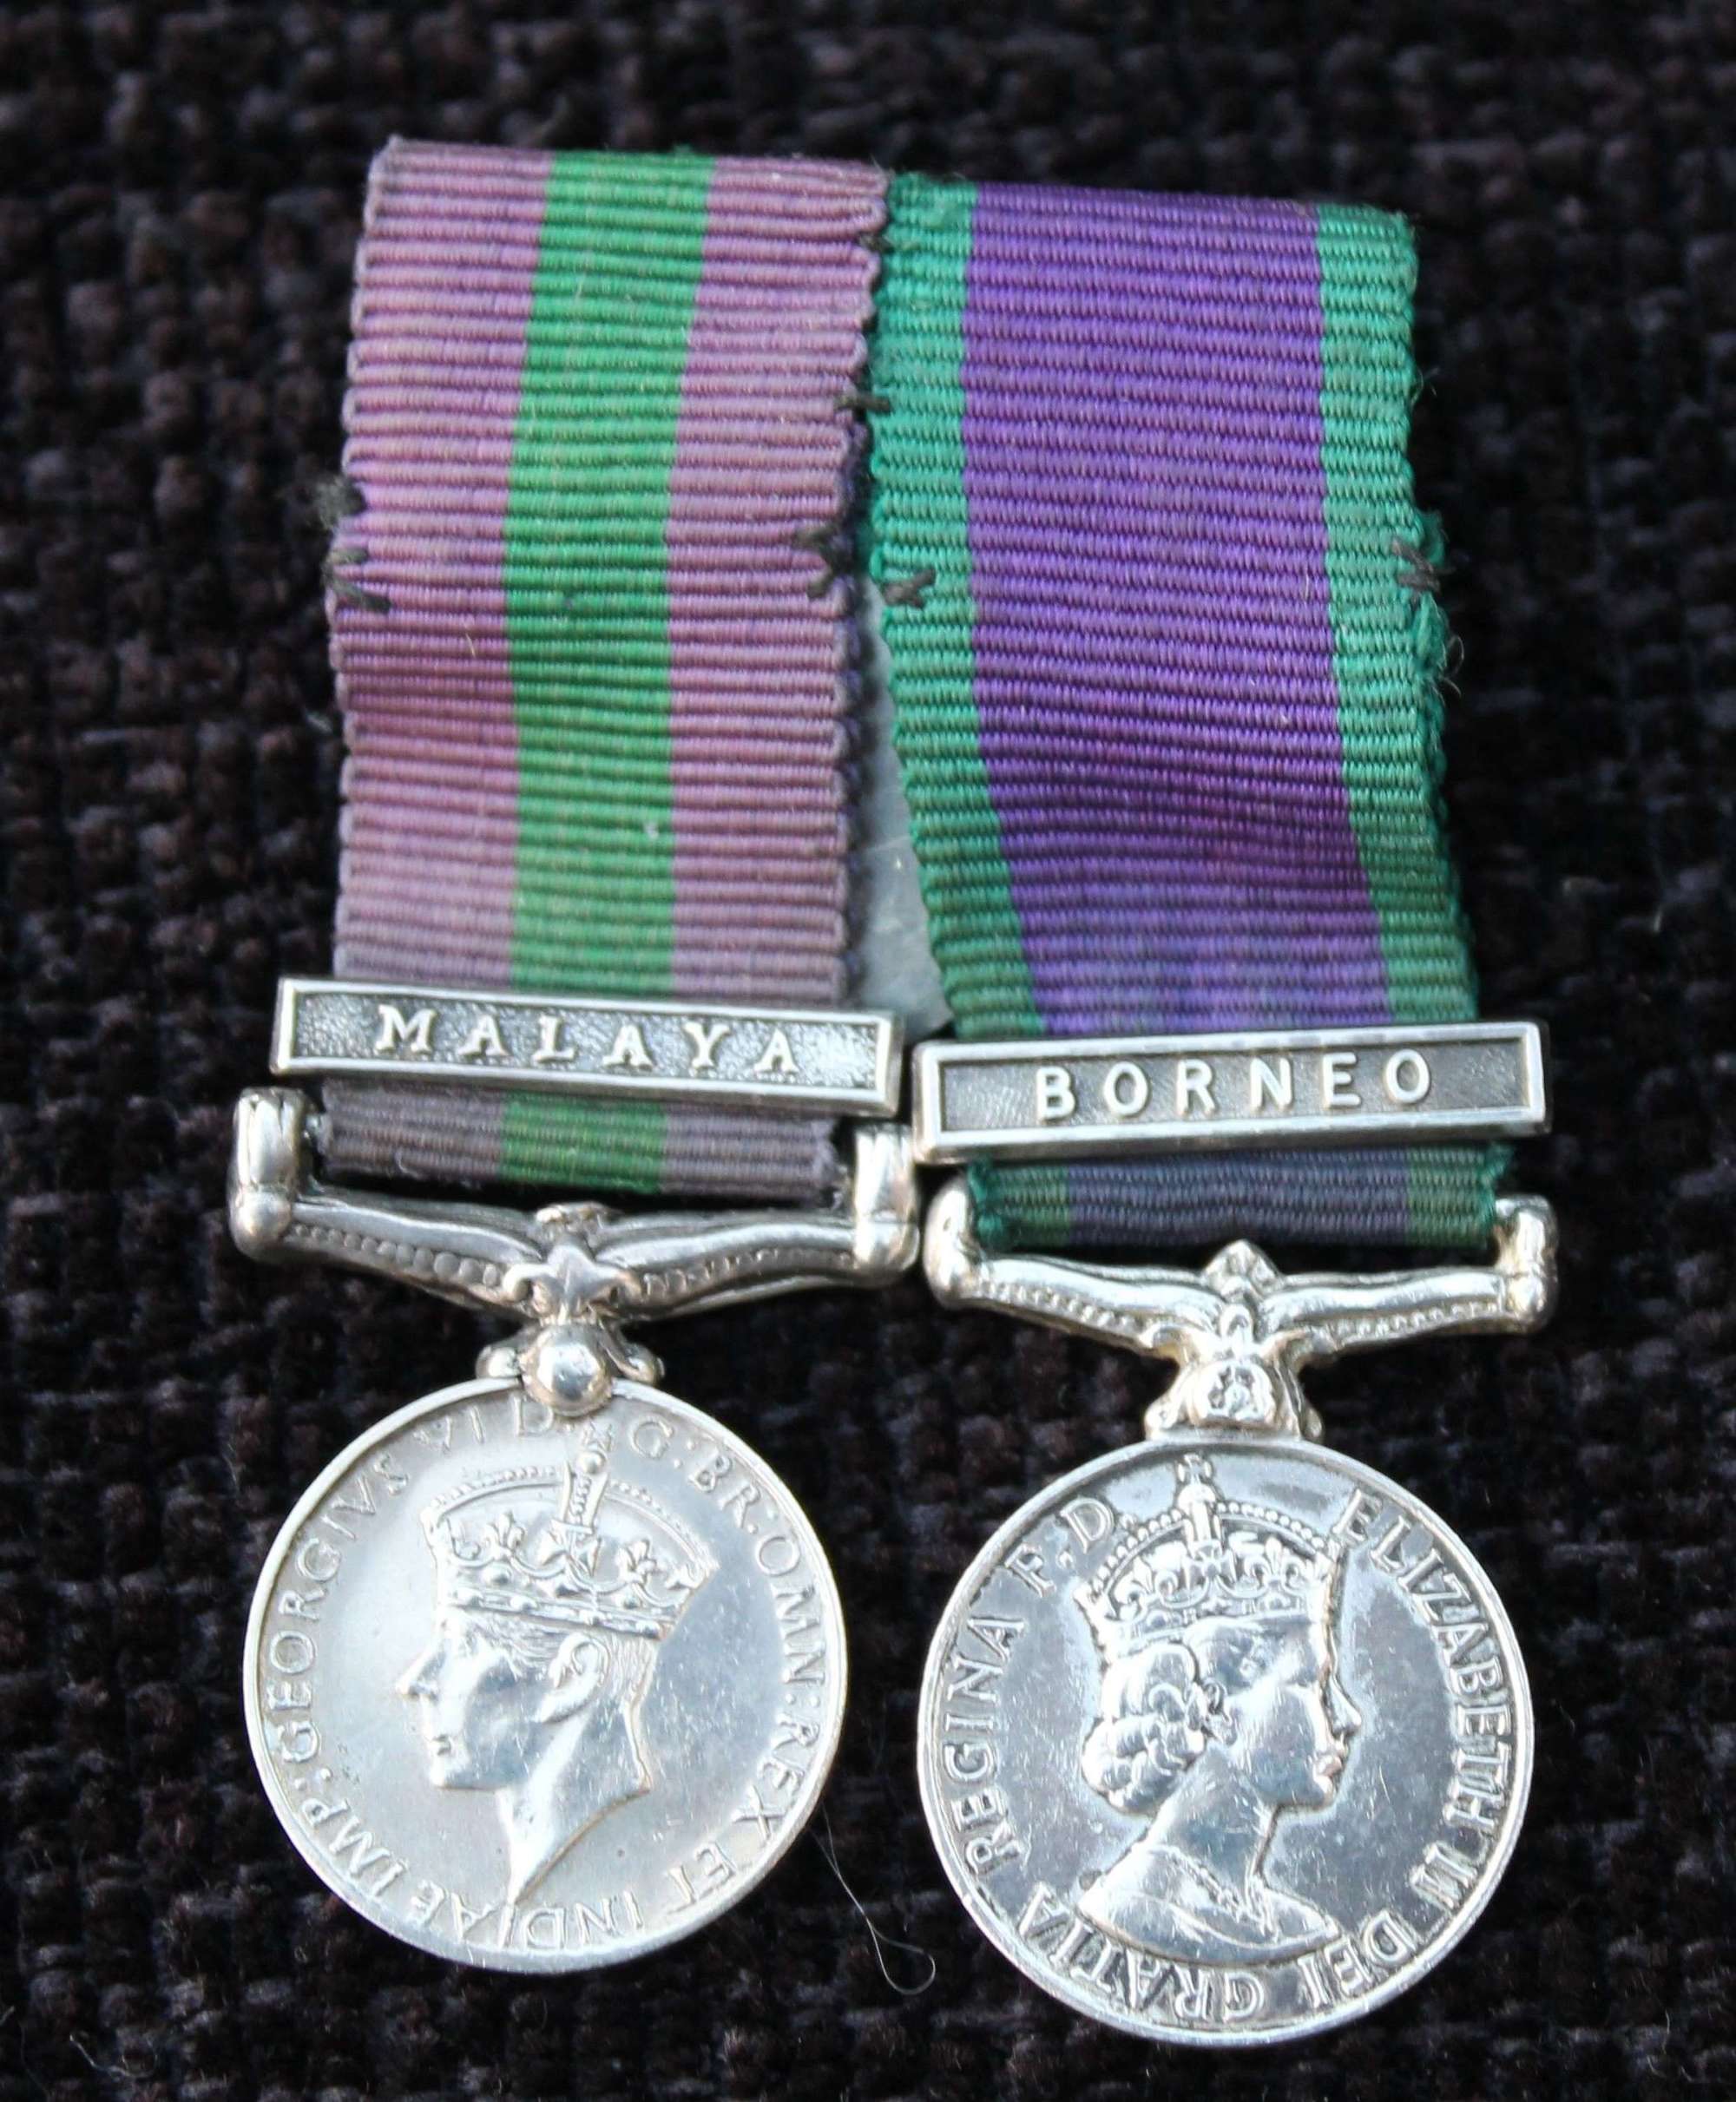 Miniature General&Campaign Service Medal Pair